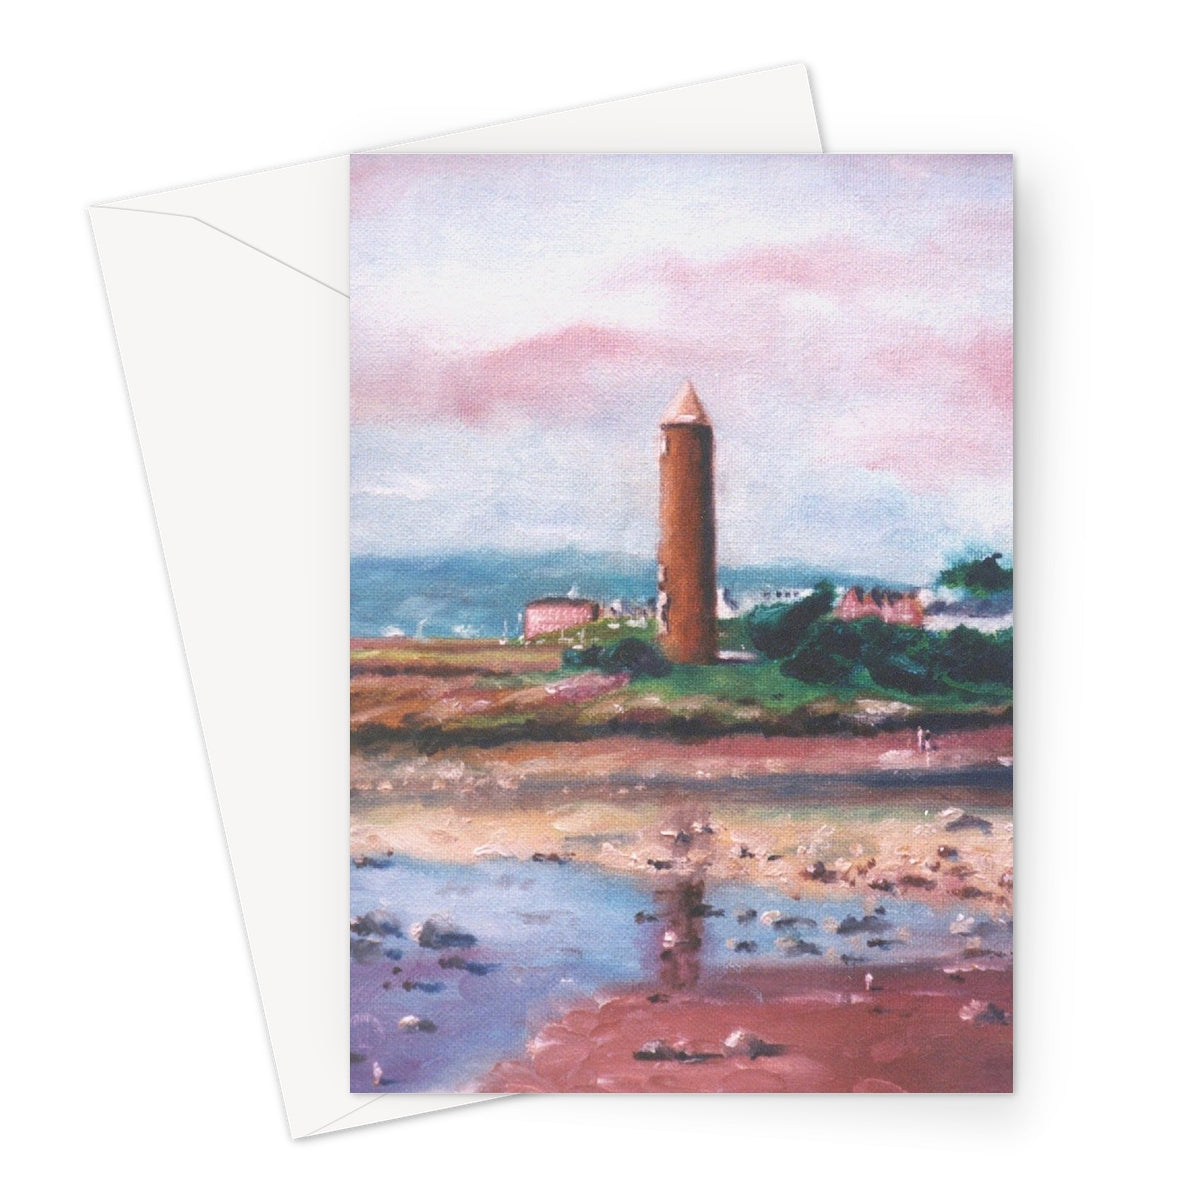 Pencil Point Largs Art Gifts Greeting Card-Greetings Cards-River Clyde Art Gallery-A5 Portrait-1 Card-Paintings, Prints, Homeware, Art Gifts From Scotland By Scottish Artist Kevin Hunter